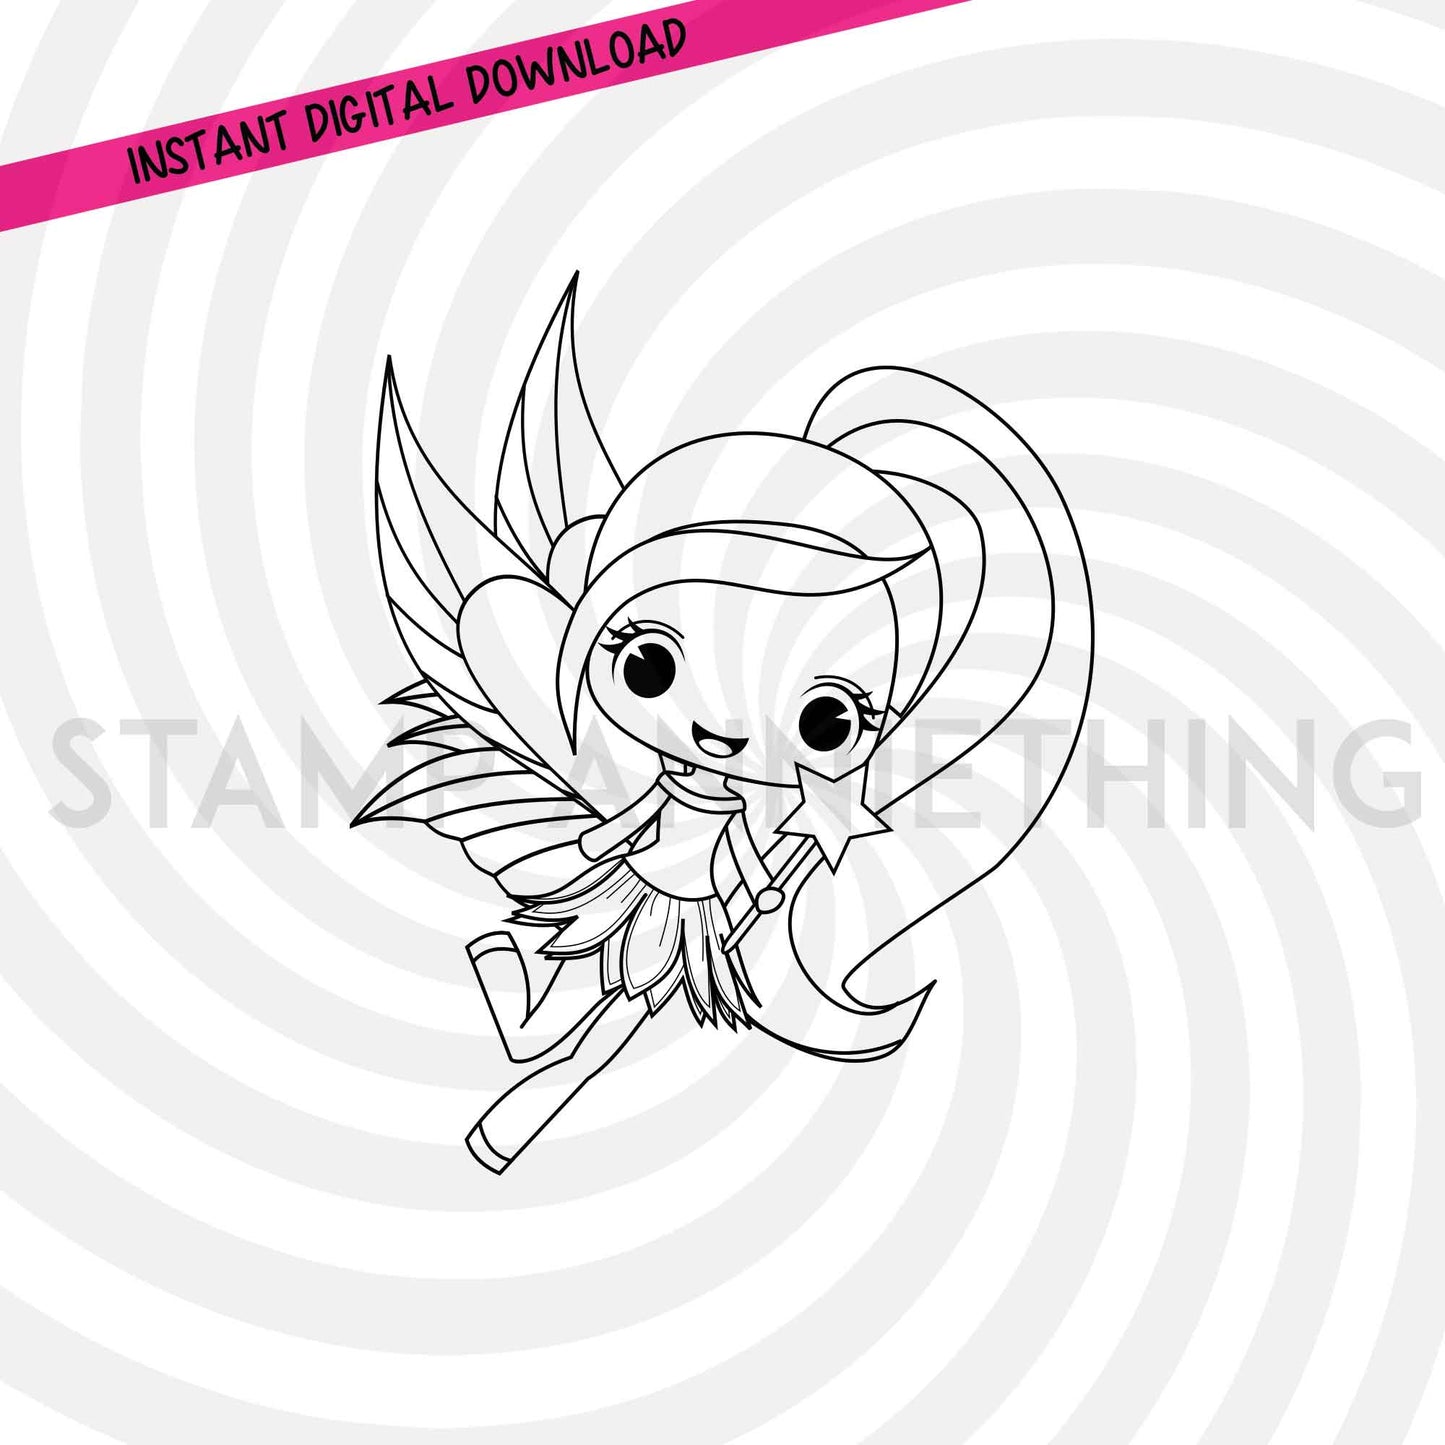 Tooth Fairy DIGITAL STAMP